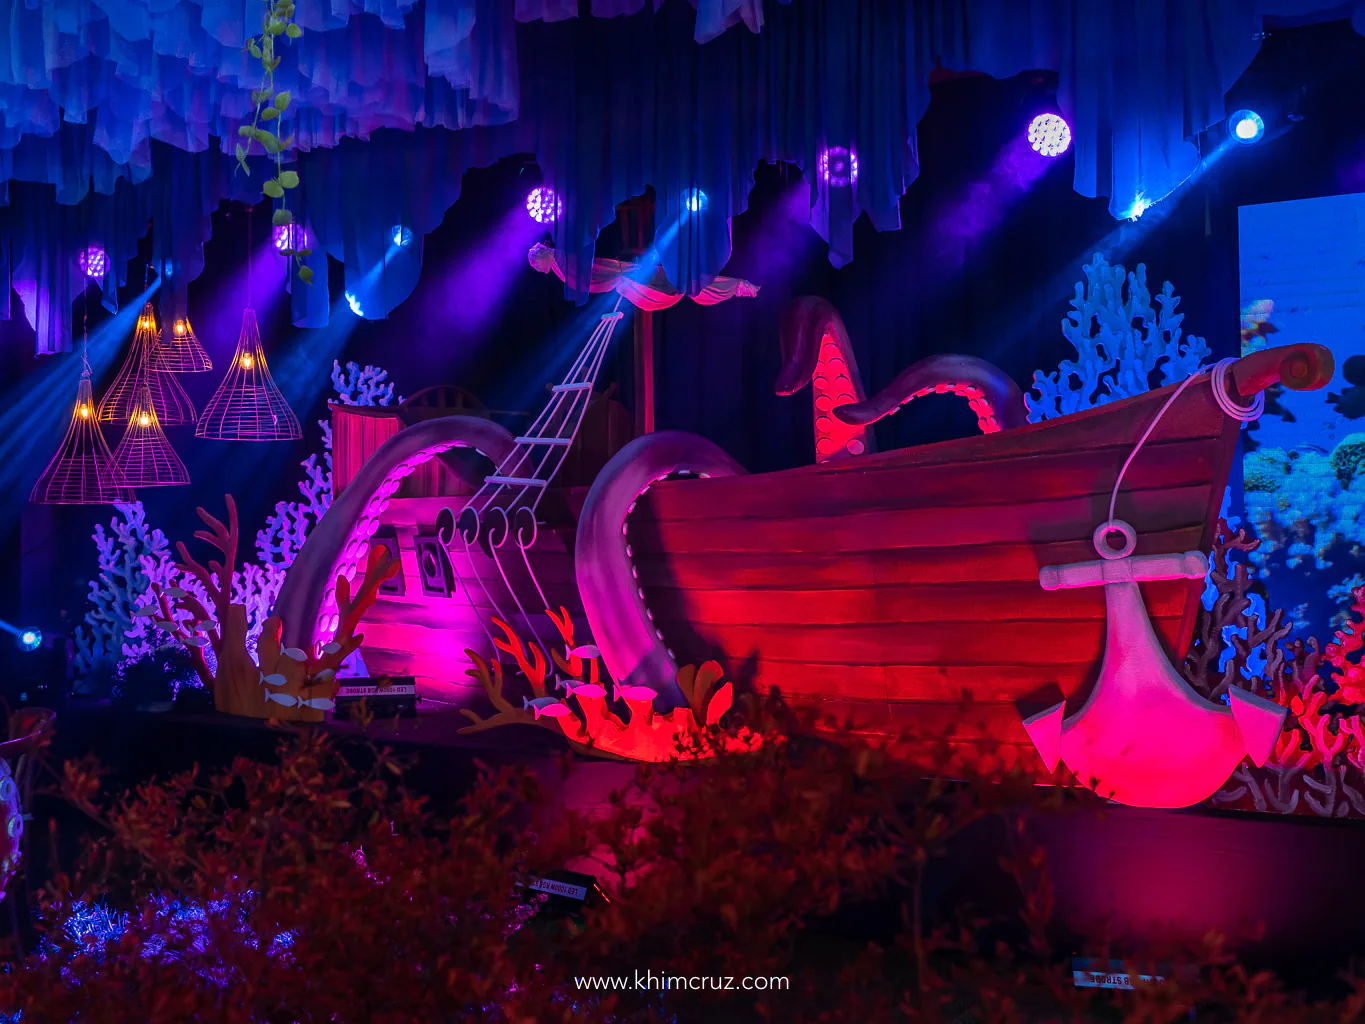 shipwrecked vessel covered by giant squid as stage backdrop of under the sea birthday by Khim Cruz